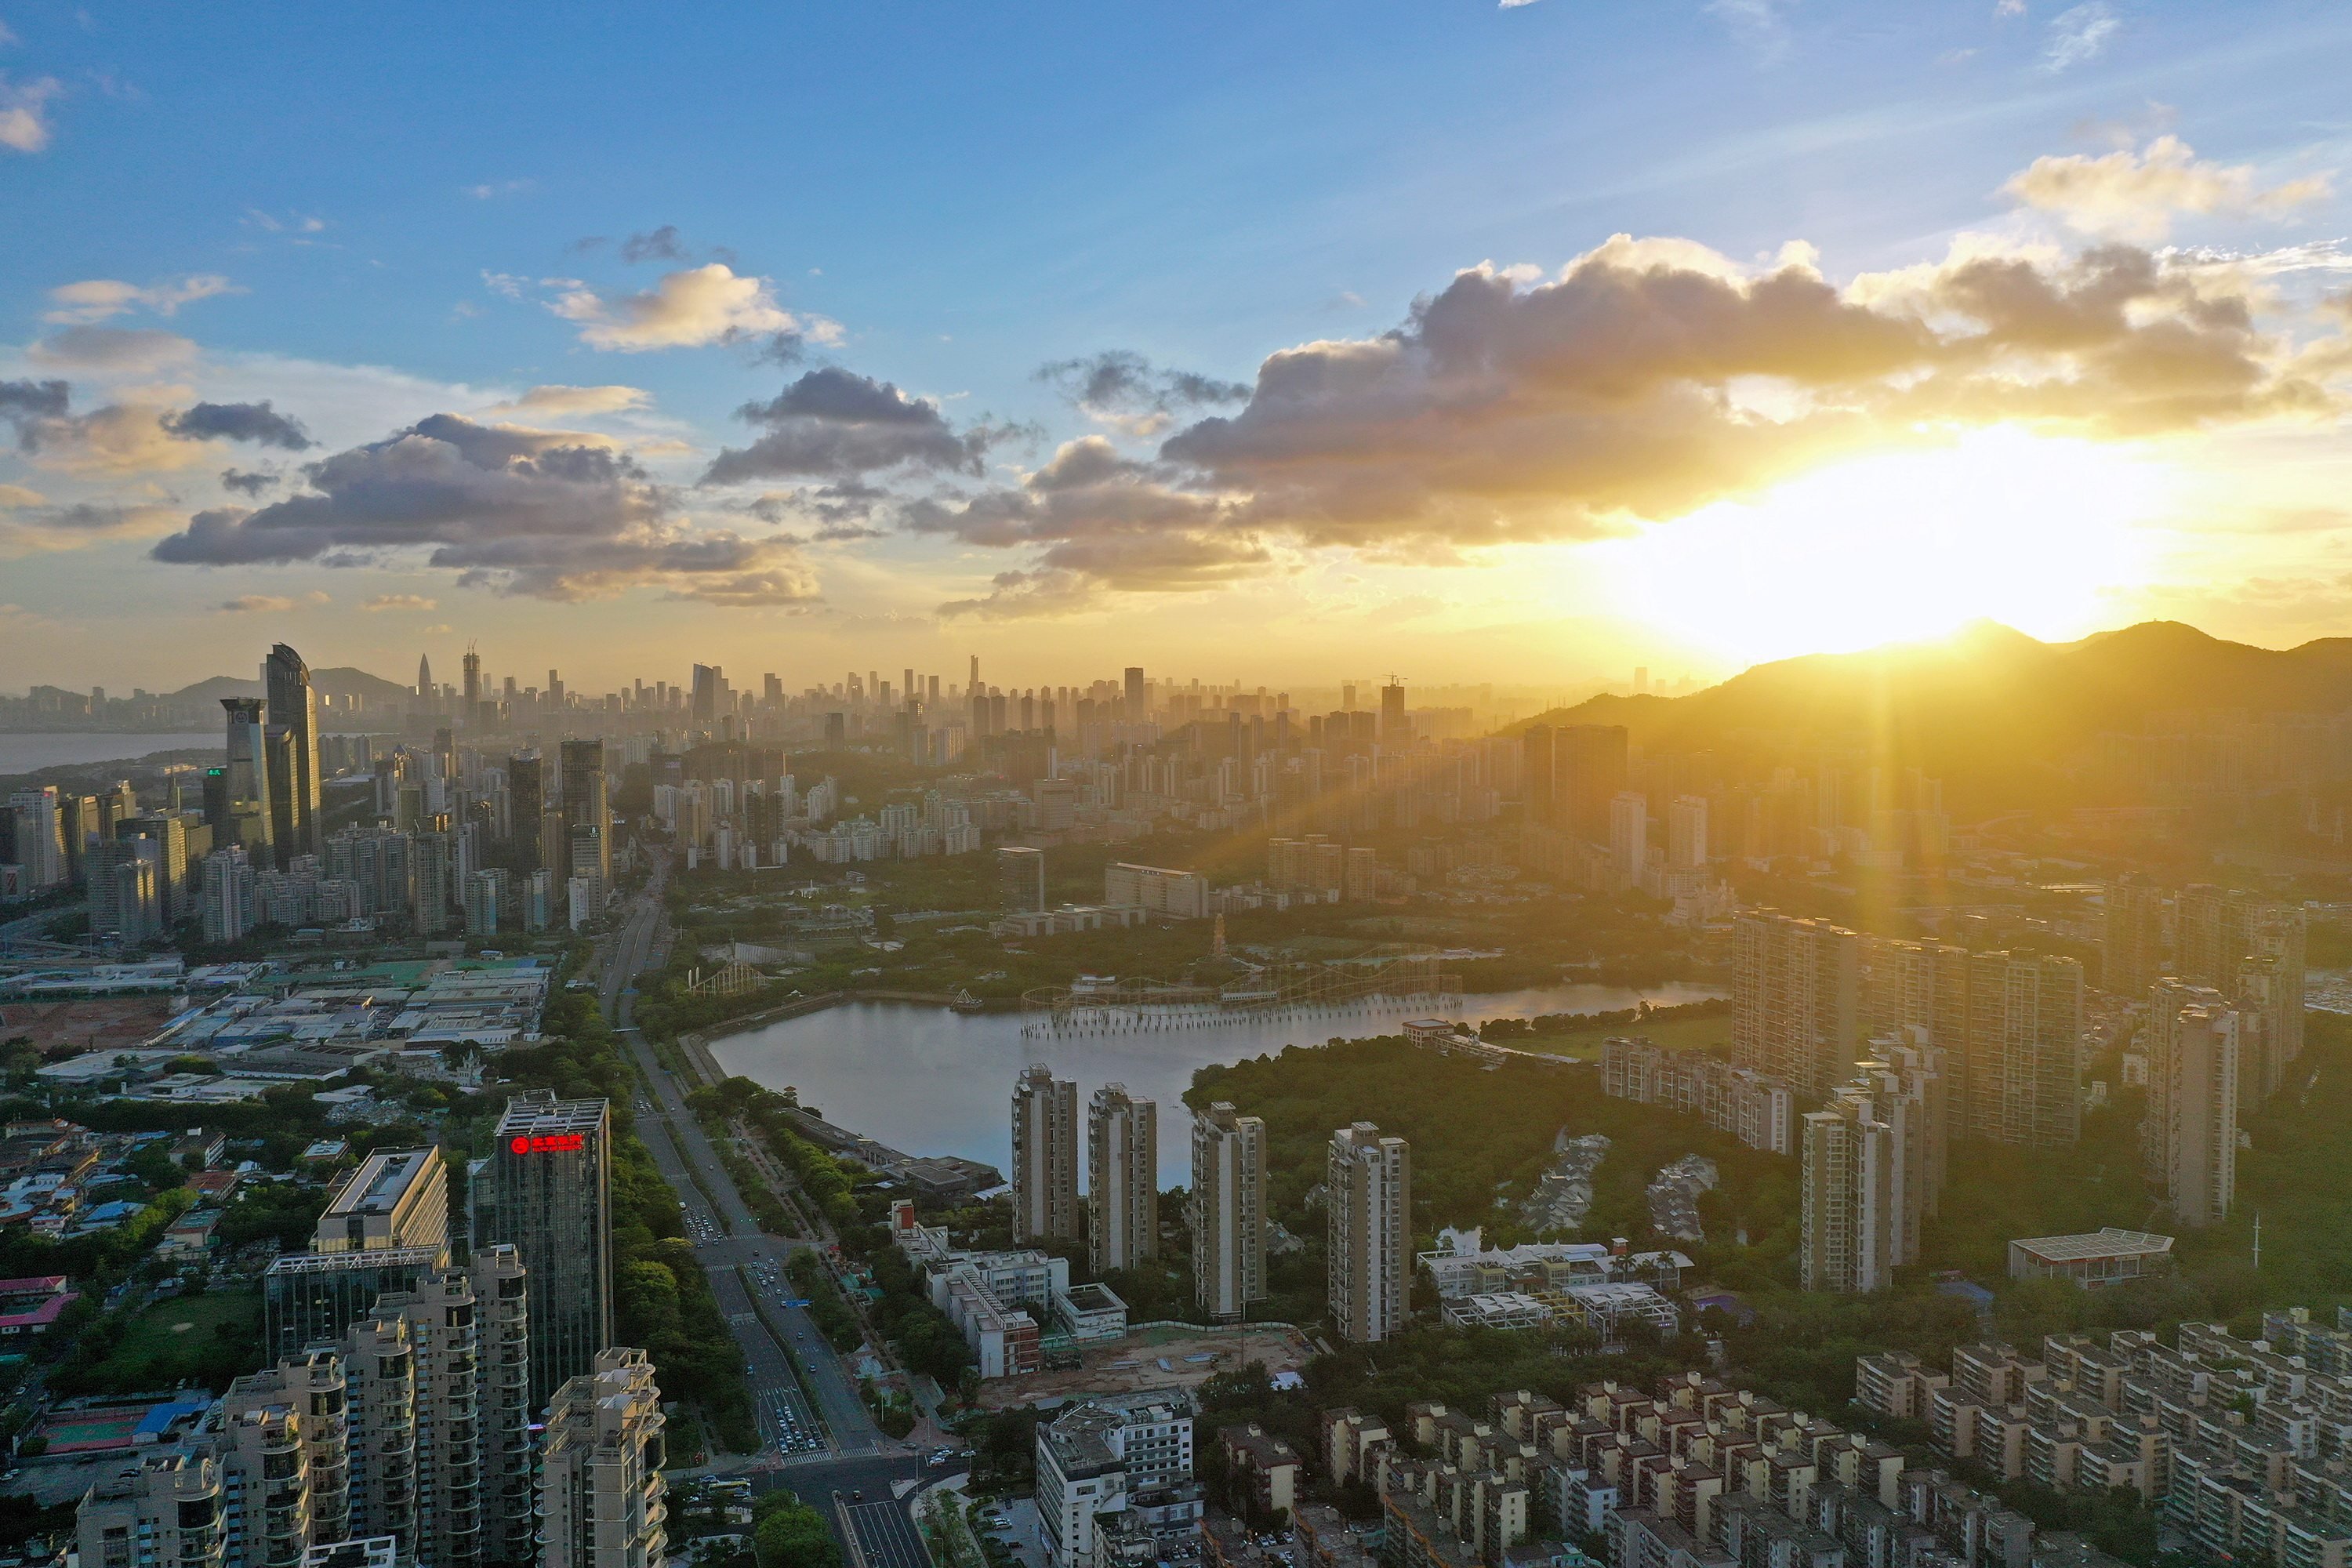 An aerial photo taken in June 2020 shows the Futian District of Shenzhen, one of the mainland China cities included in the Greater Bay Area. Photo: Xinhua